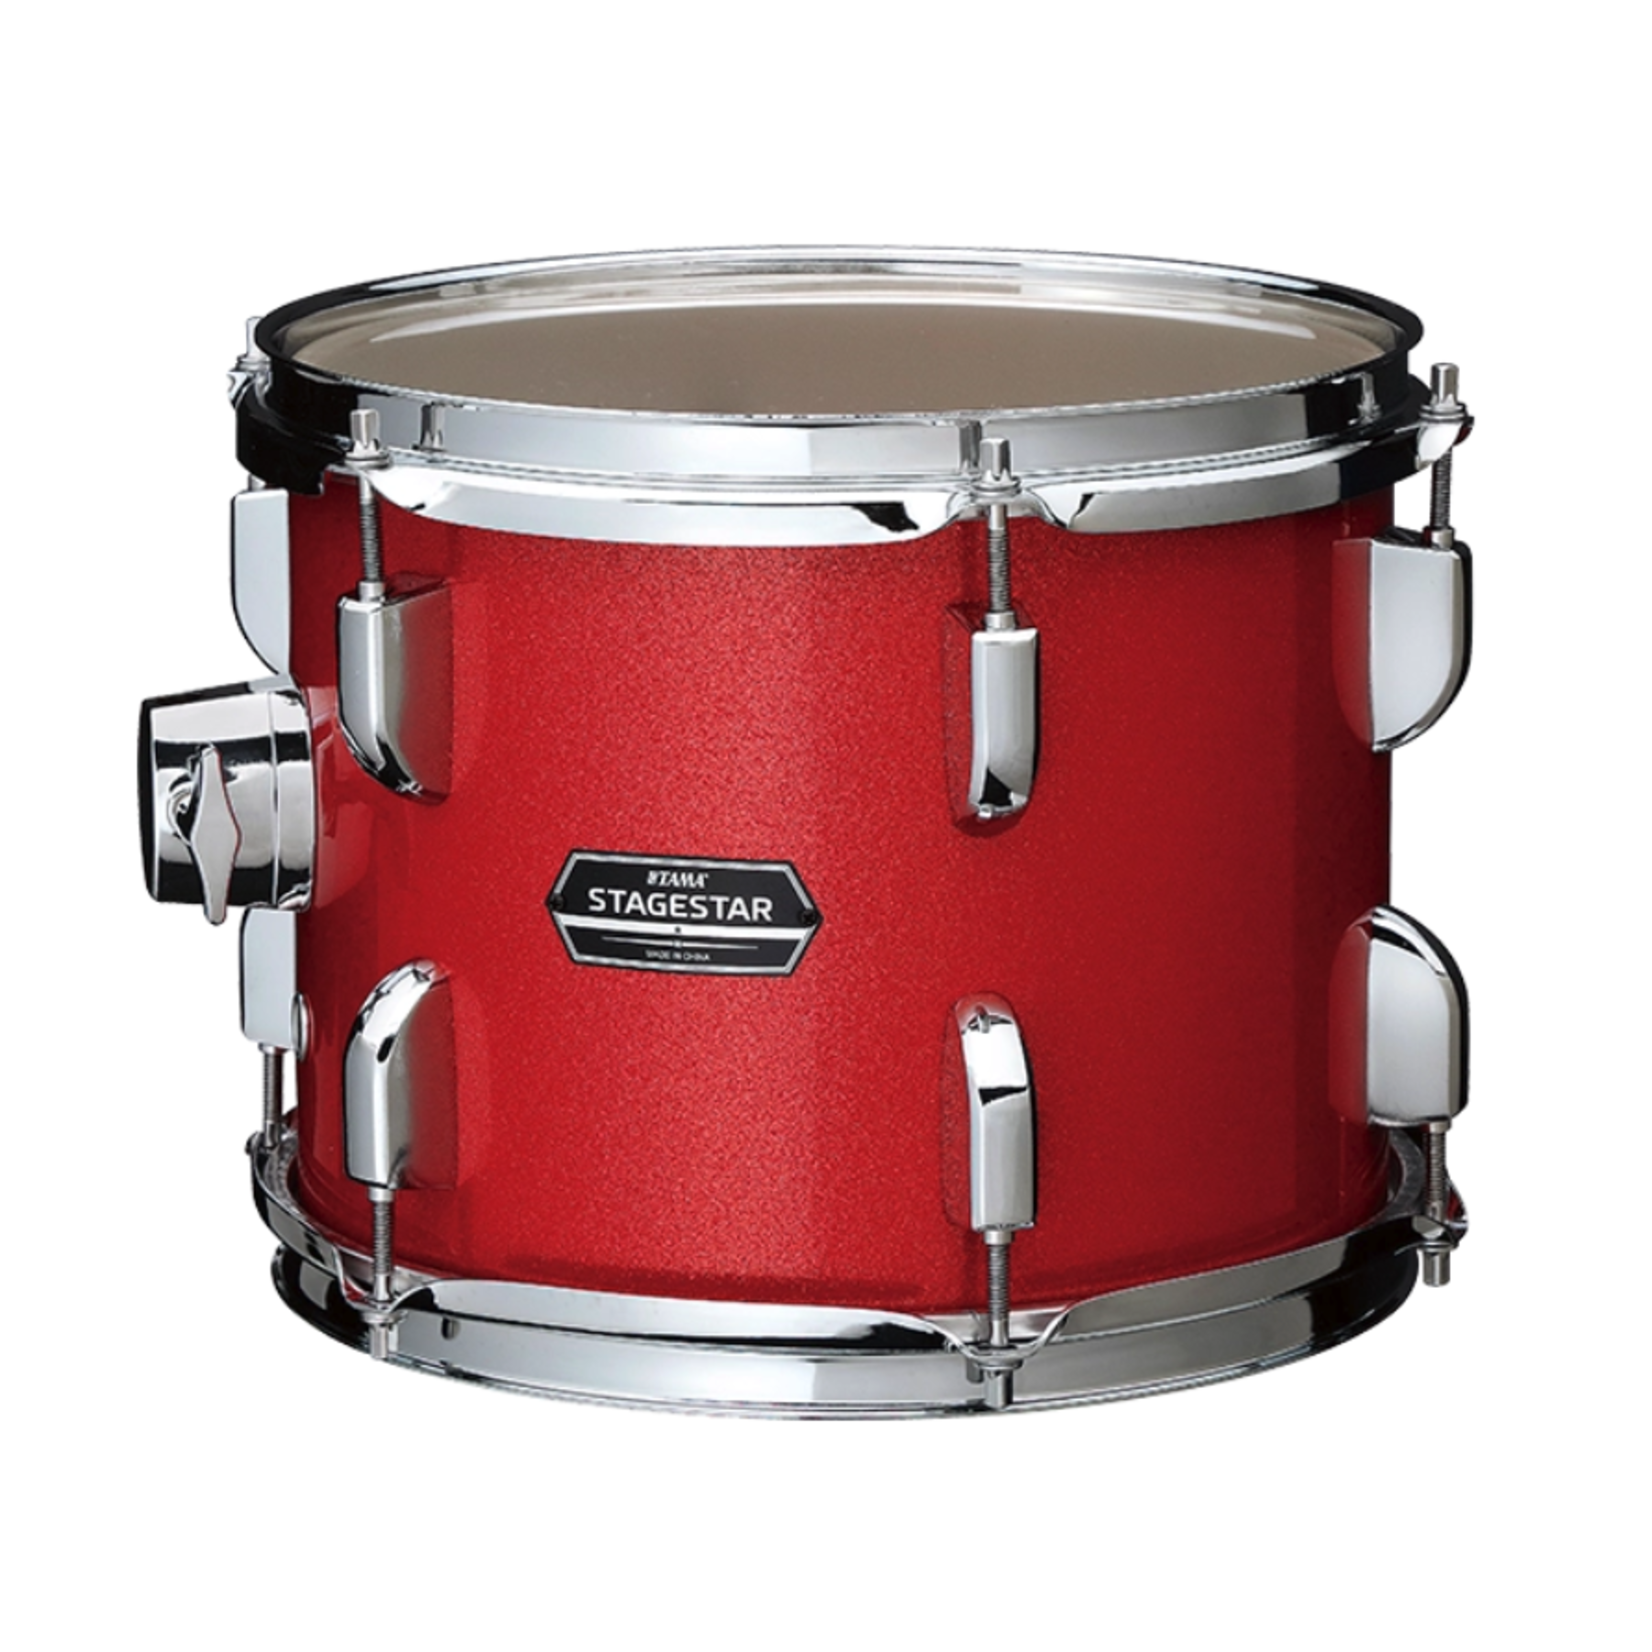 Tama Stagestar 5-Piece Complete Drum Set - Candy Red Sparkle